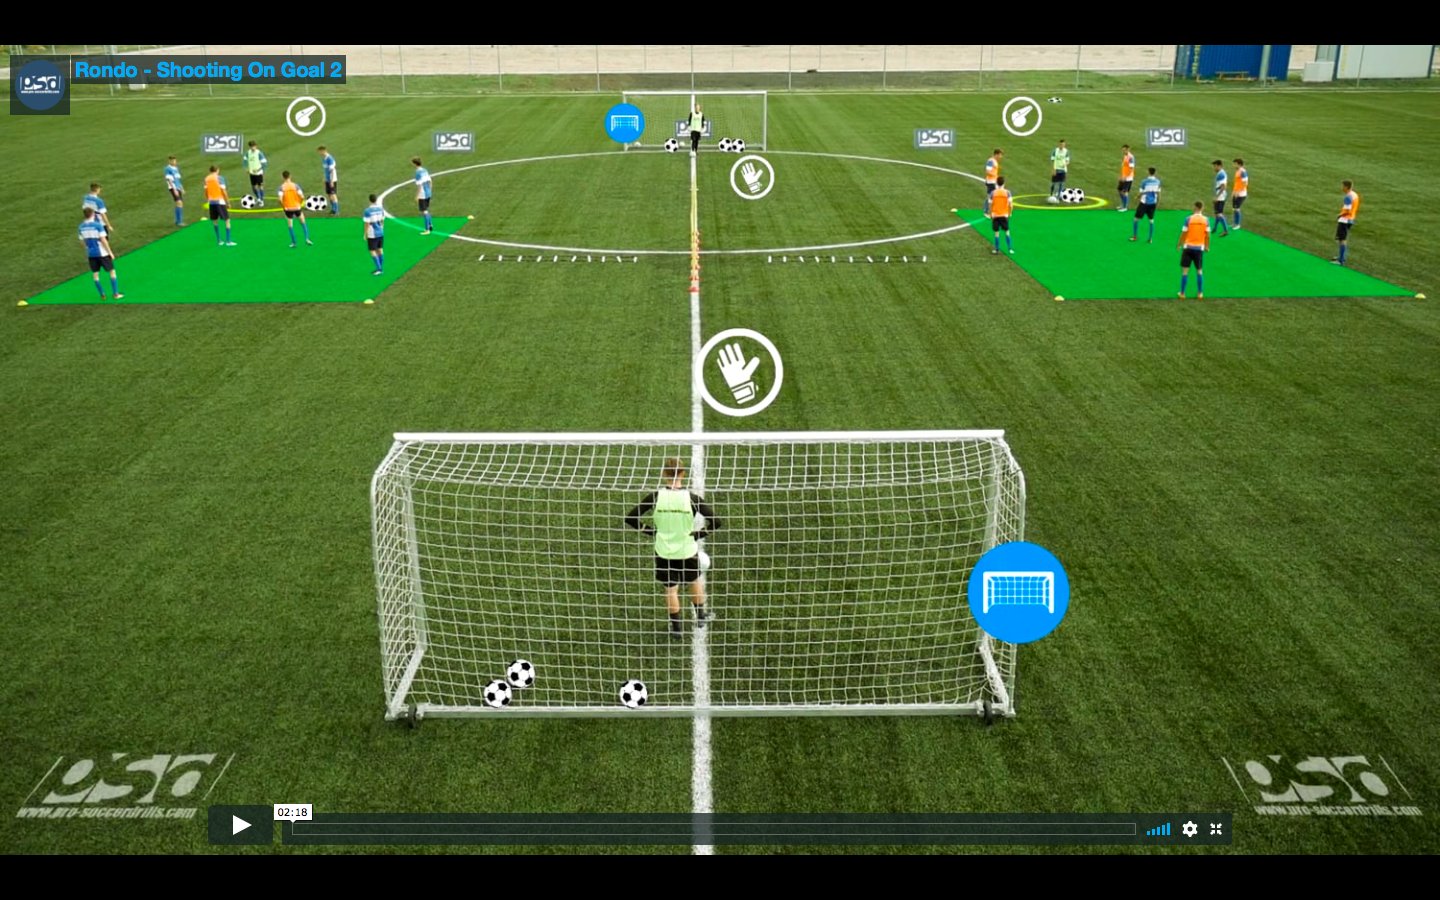 Pro Soccerdrills Com New Soccer Drill Upload T Co Itytgkzp99 Goal This Complex Soccer Drill Focuses On Developing The Possession The Quick Decision Making And The Speed Of Play Besides Improves The Endurance And The Finishing Skills